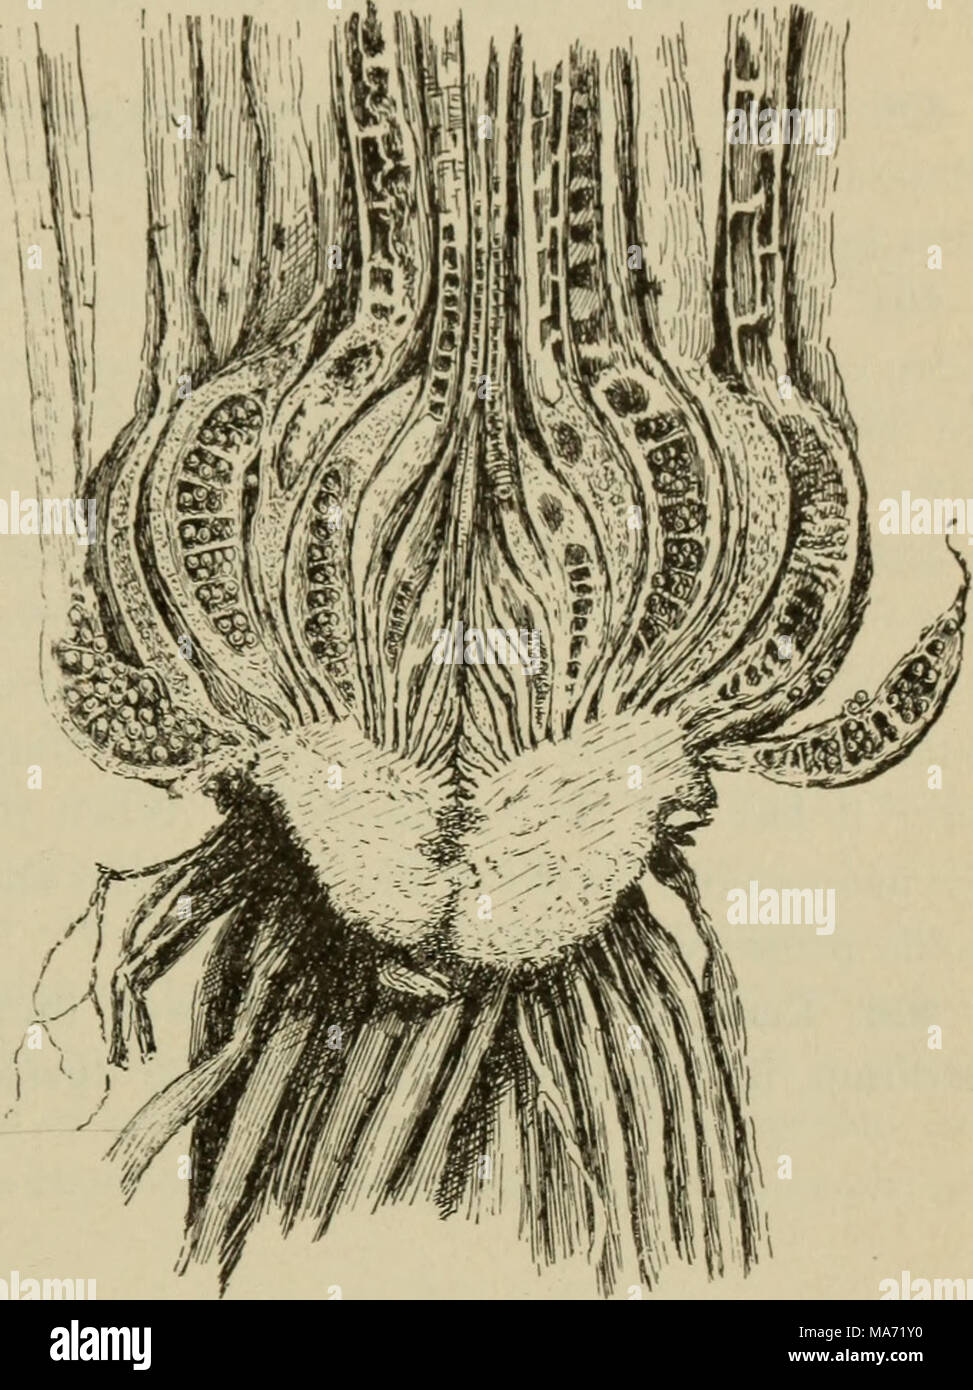 . Elementary botany . Fig. 249. Base of leaf of isoetes, showing sporangium with macrospores. (Isoetes en- gelmannii.) Fig. 250. Section of plant of Isoetes engelmanii, showing cup- shaped stem, and longitudinal sections of the sporan- gia in the thickened bases of the leaves. ure from the other portions of the leaf. This is a sporangium. Beside the spores on the inside of the sporangium, there are strands of sterile tissue which extend across the cavity. This is peculiar to isoetes of all the members of the class of plants to which the ferns belong, but it will be remembered that sterile stra Stock Photo